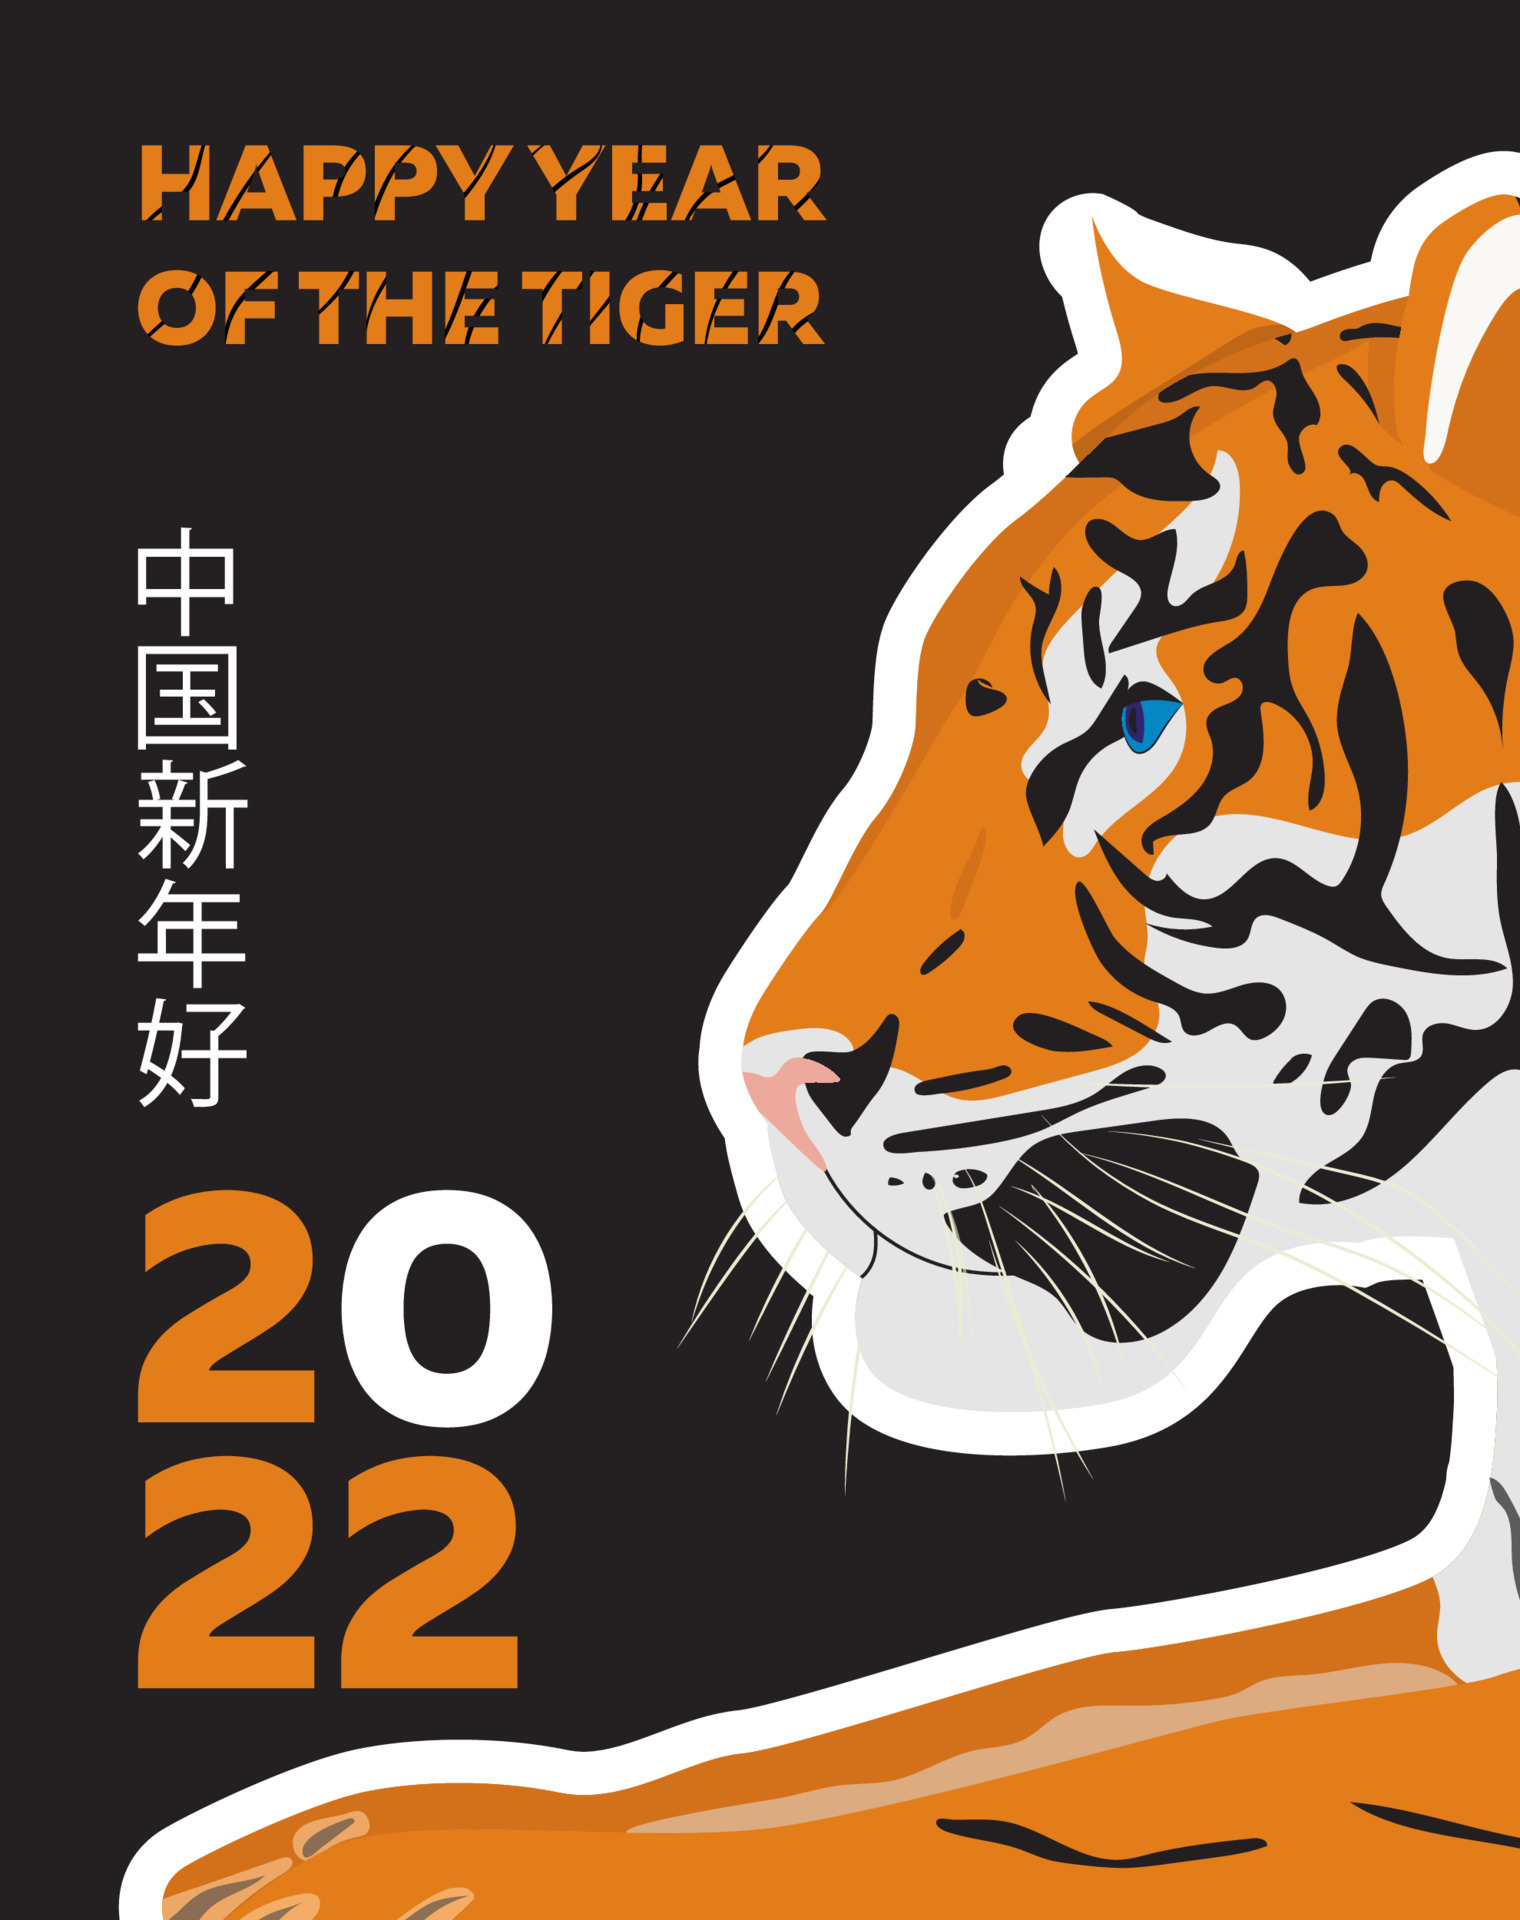 Chinese New Year Poster With Numbers And Tiger The Hieroglyphic